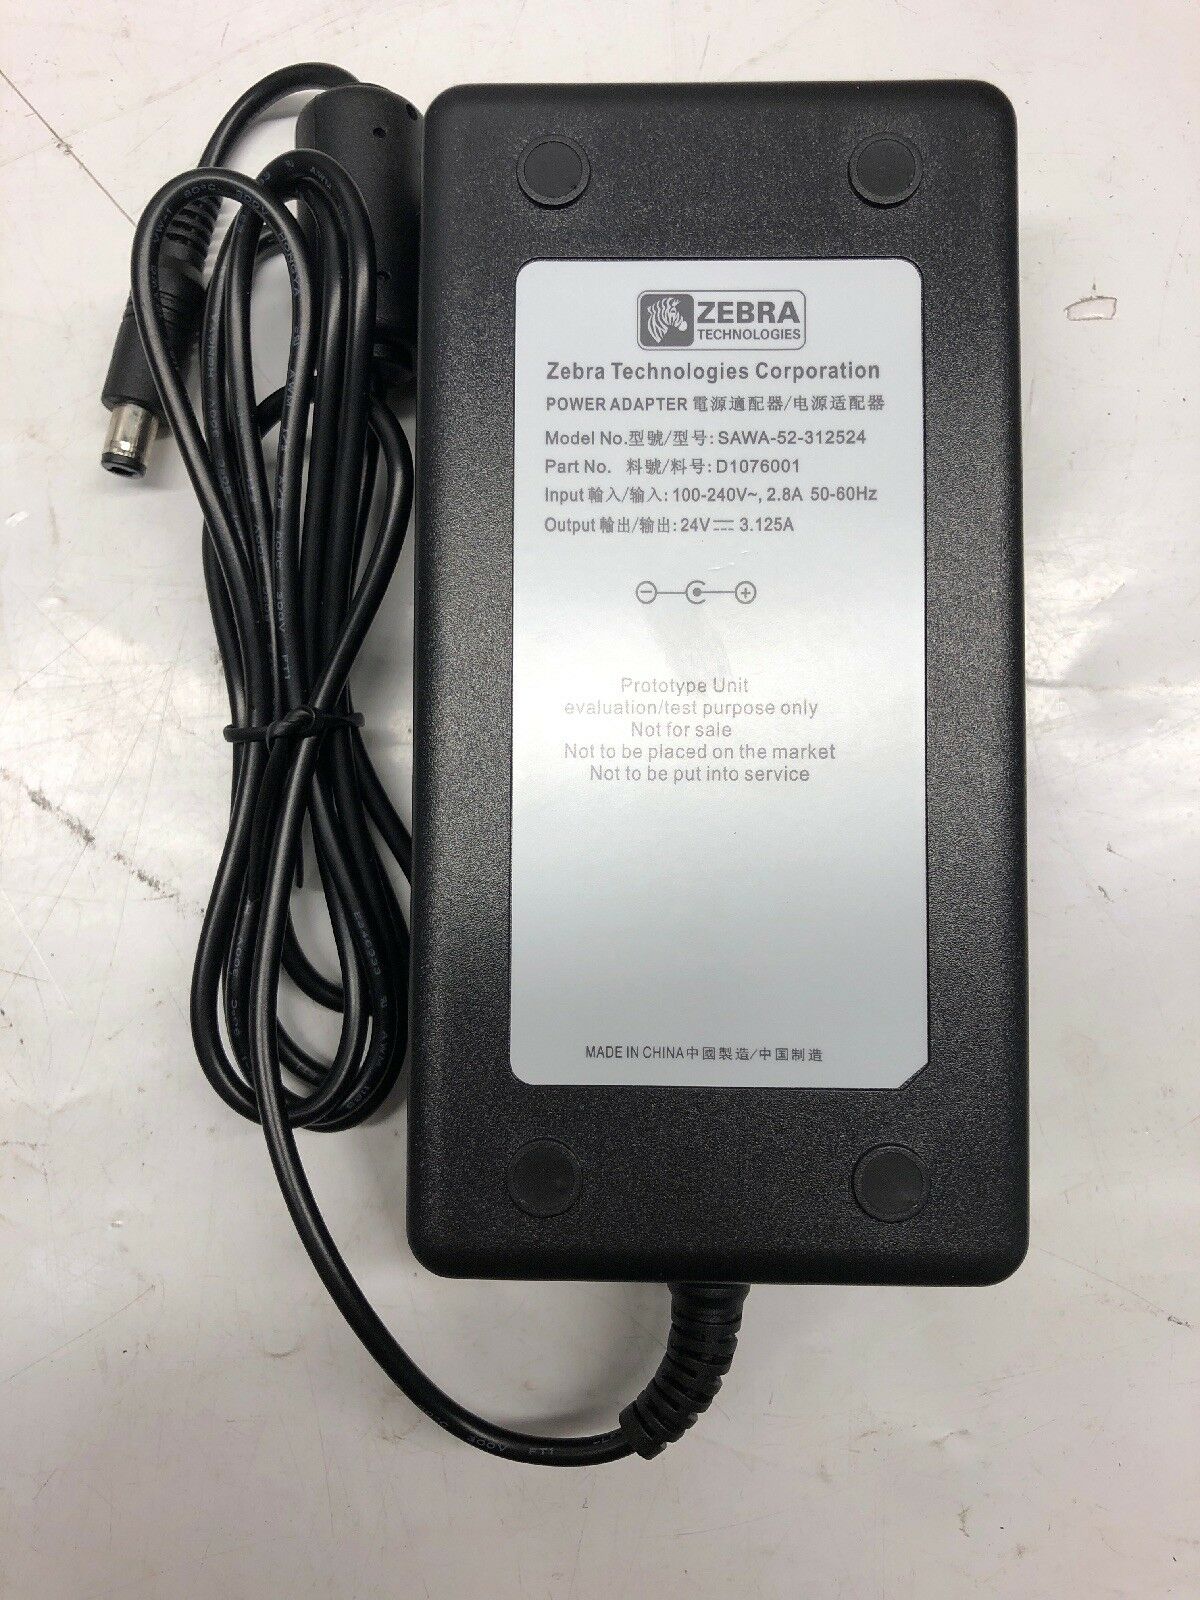 Zebra Thermal Printer Power Supply Adapter SAWA-52-312524 (output 24V-3.125A) Country/Region of Manufacture: China Cus - Click Image to Close